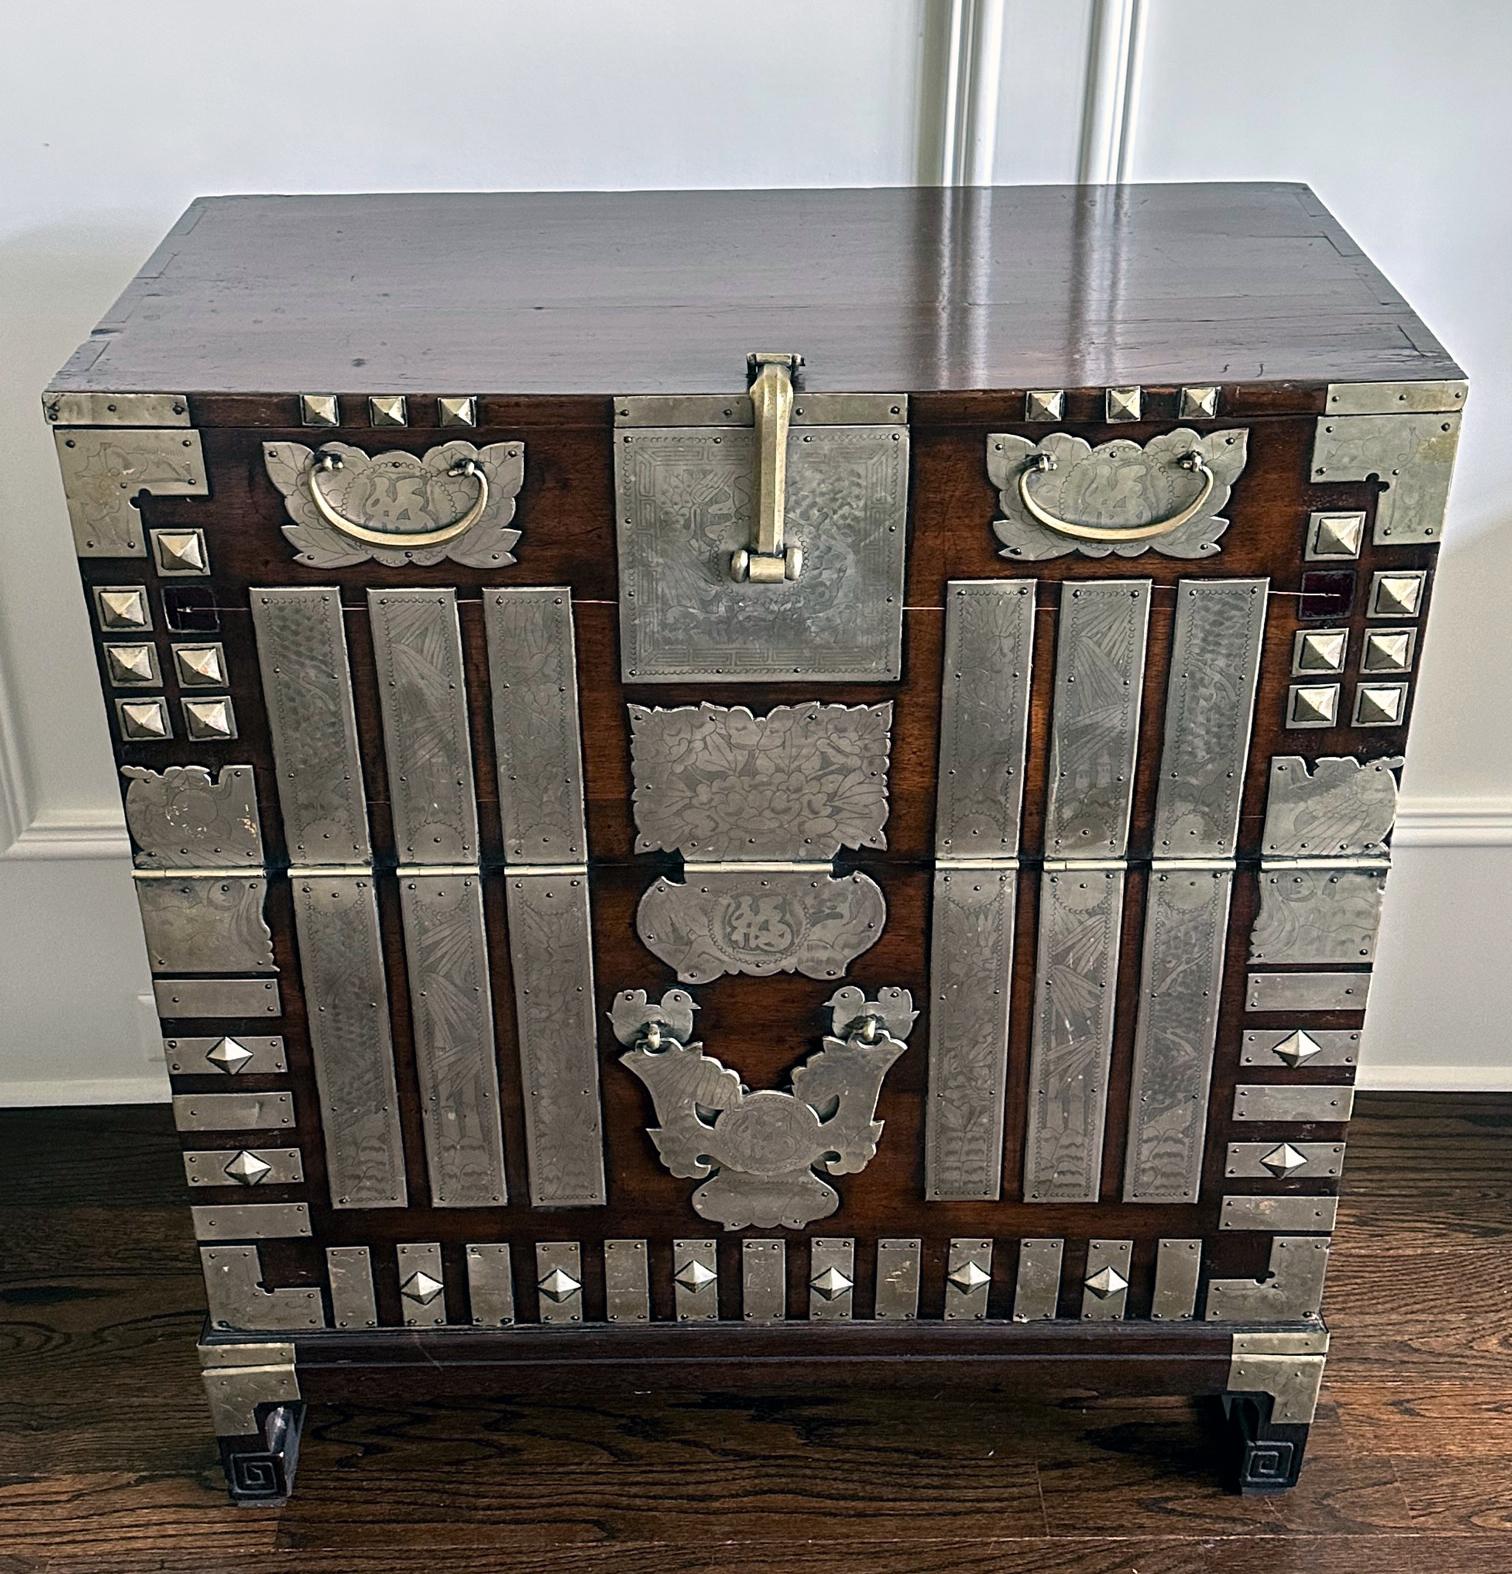 A striking Korean Bandaji with beautiful patina circa 19th century of late Joseon Dynasty. Bandaji is known as drop front half-opening chest that was used to store family valuables and beddings. The Bandaji on offer was made in Pyongyang area in now